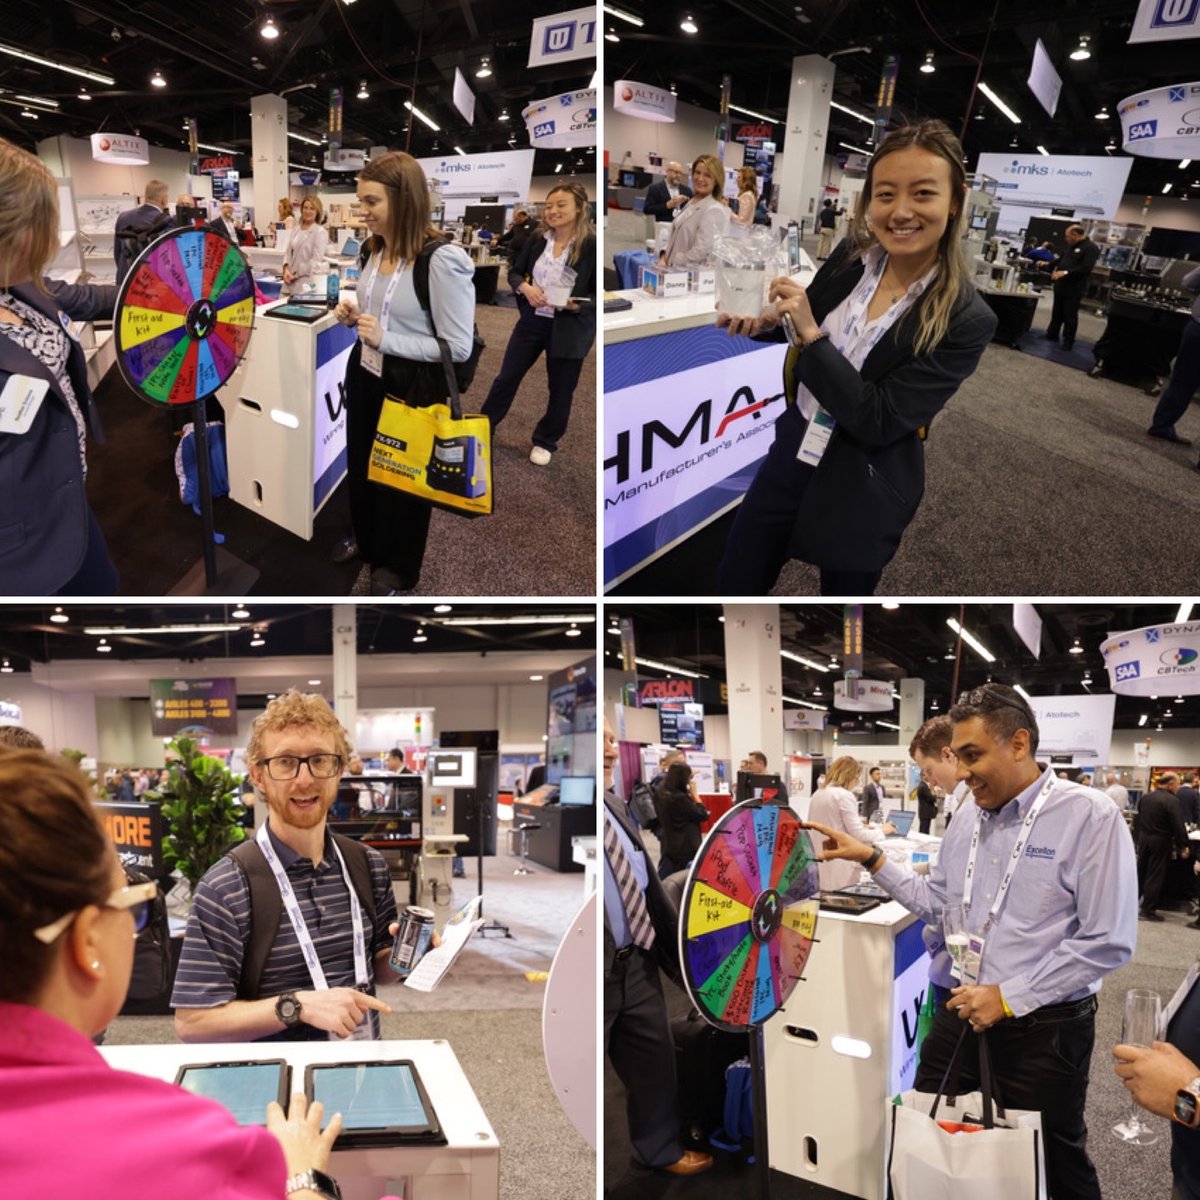 Spin the wheel, win BIG! Visit IPC Booth 4420 for a chance to win an iPad, a $500 Disney gift card, or copies of IPC Standards. #IPCAPEXEXPO